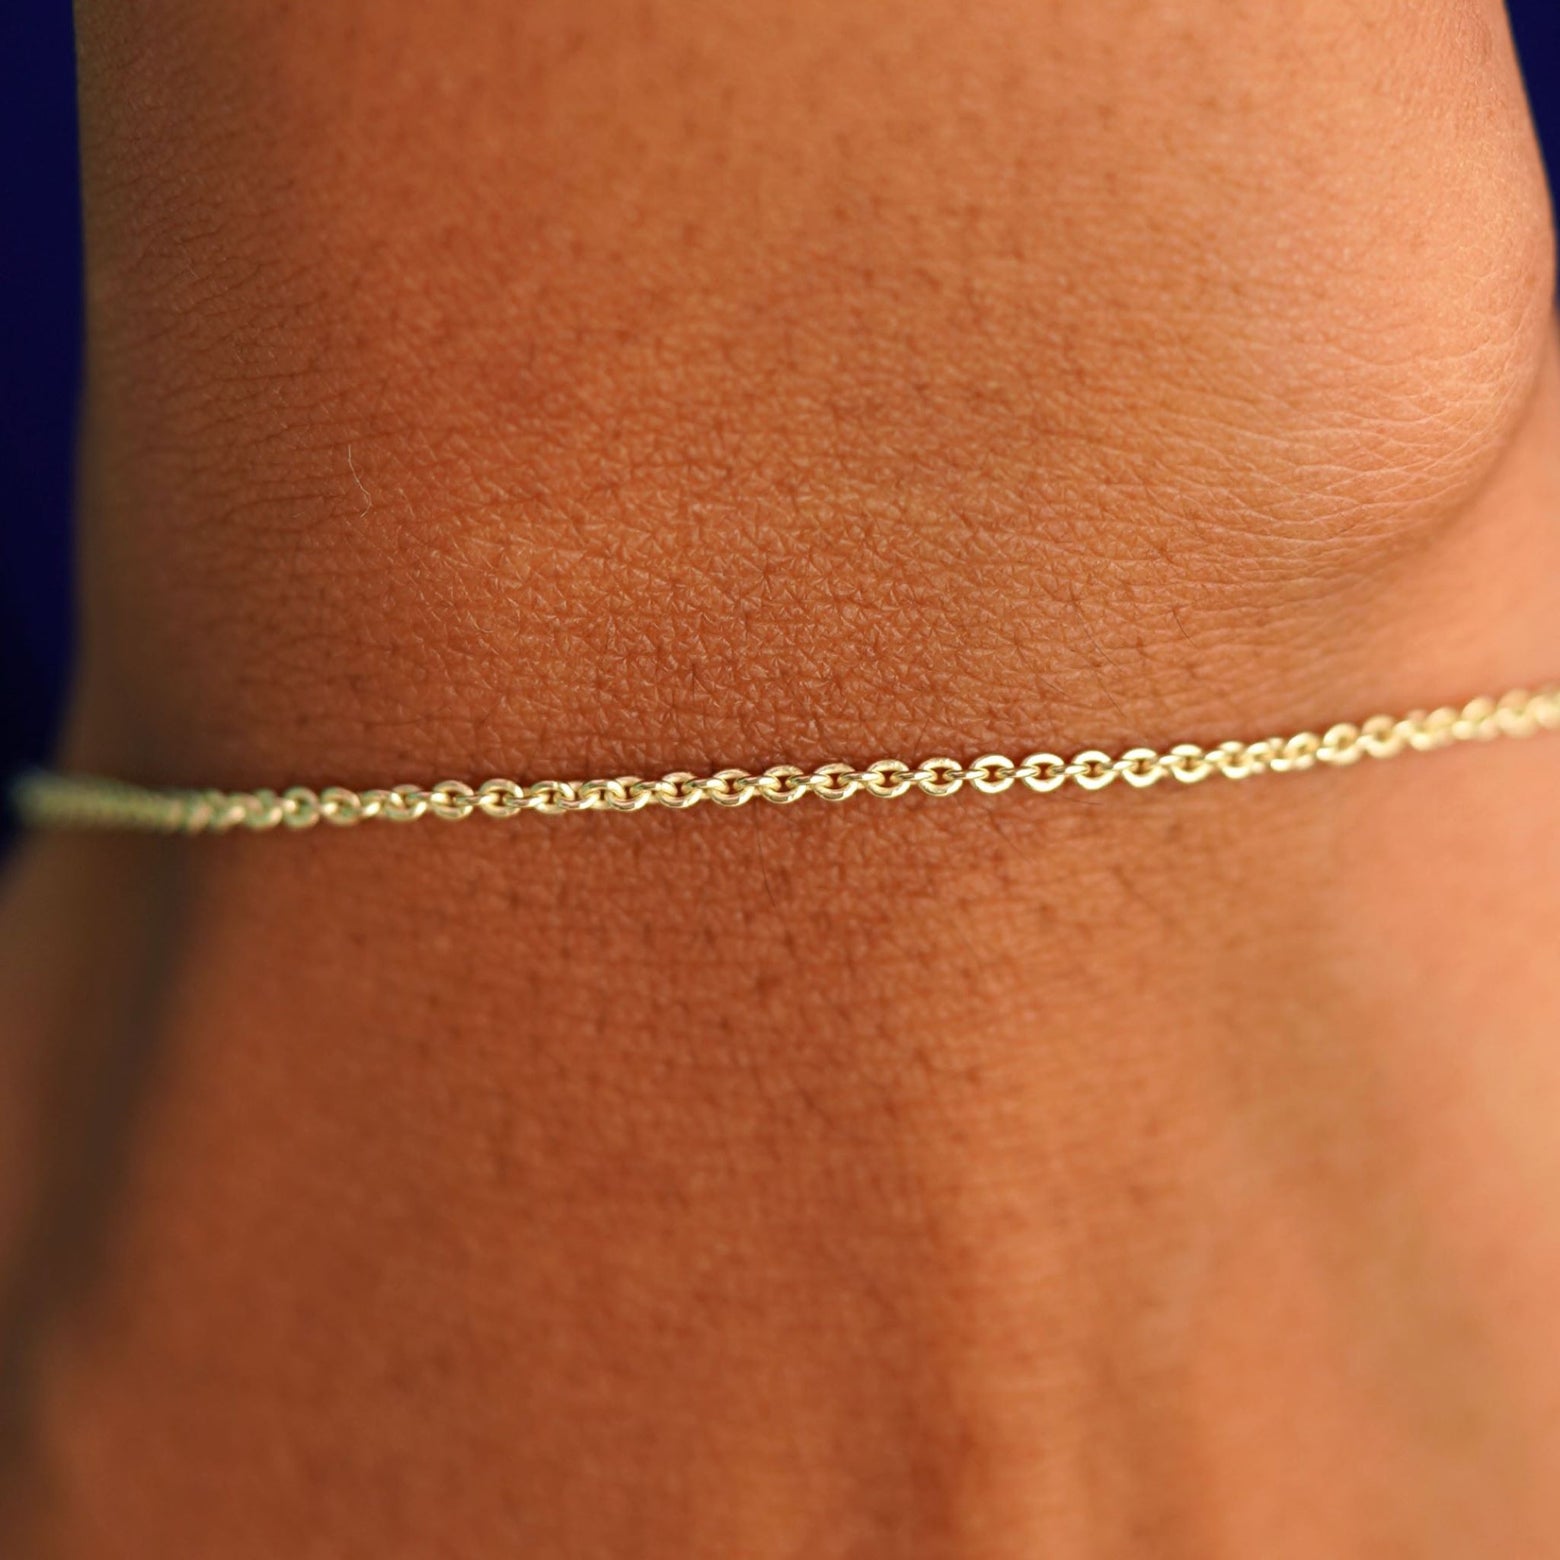 Close up view of a model's wrist wearing a solid yellow gold Thick Cable Bracelet